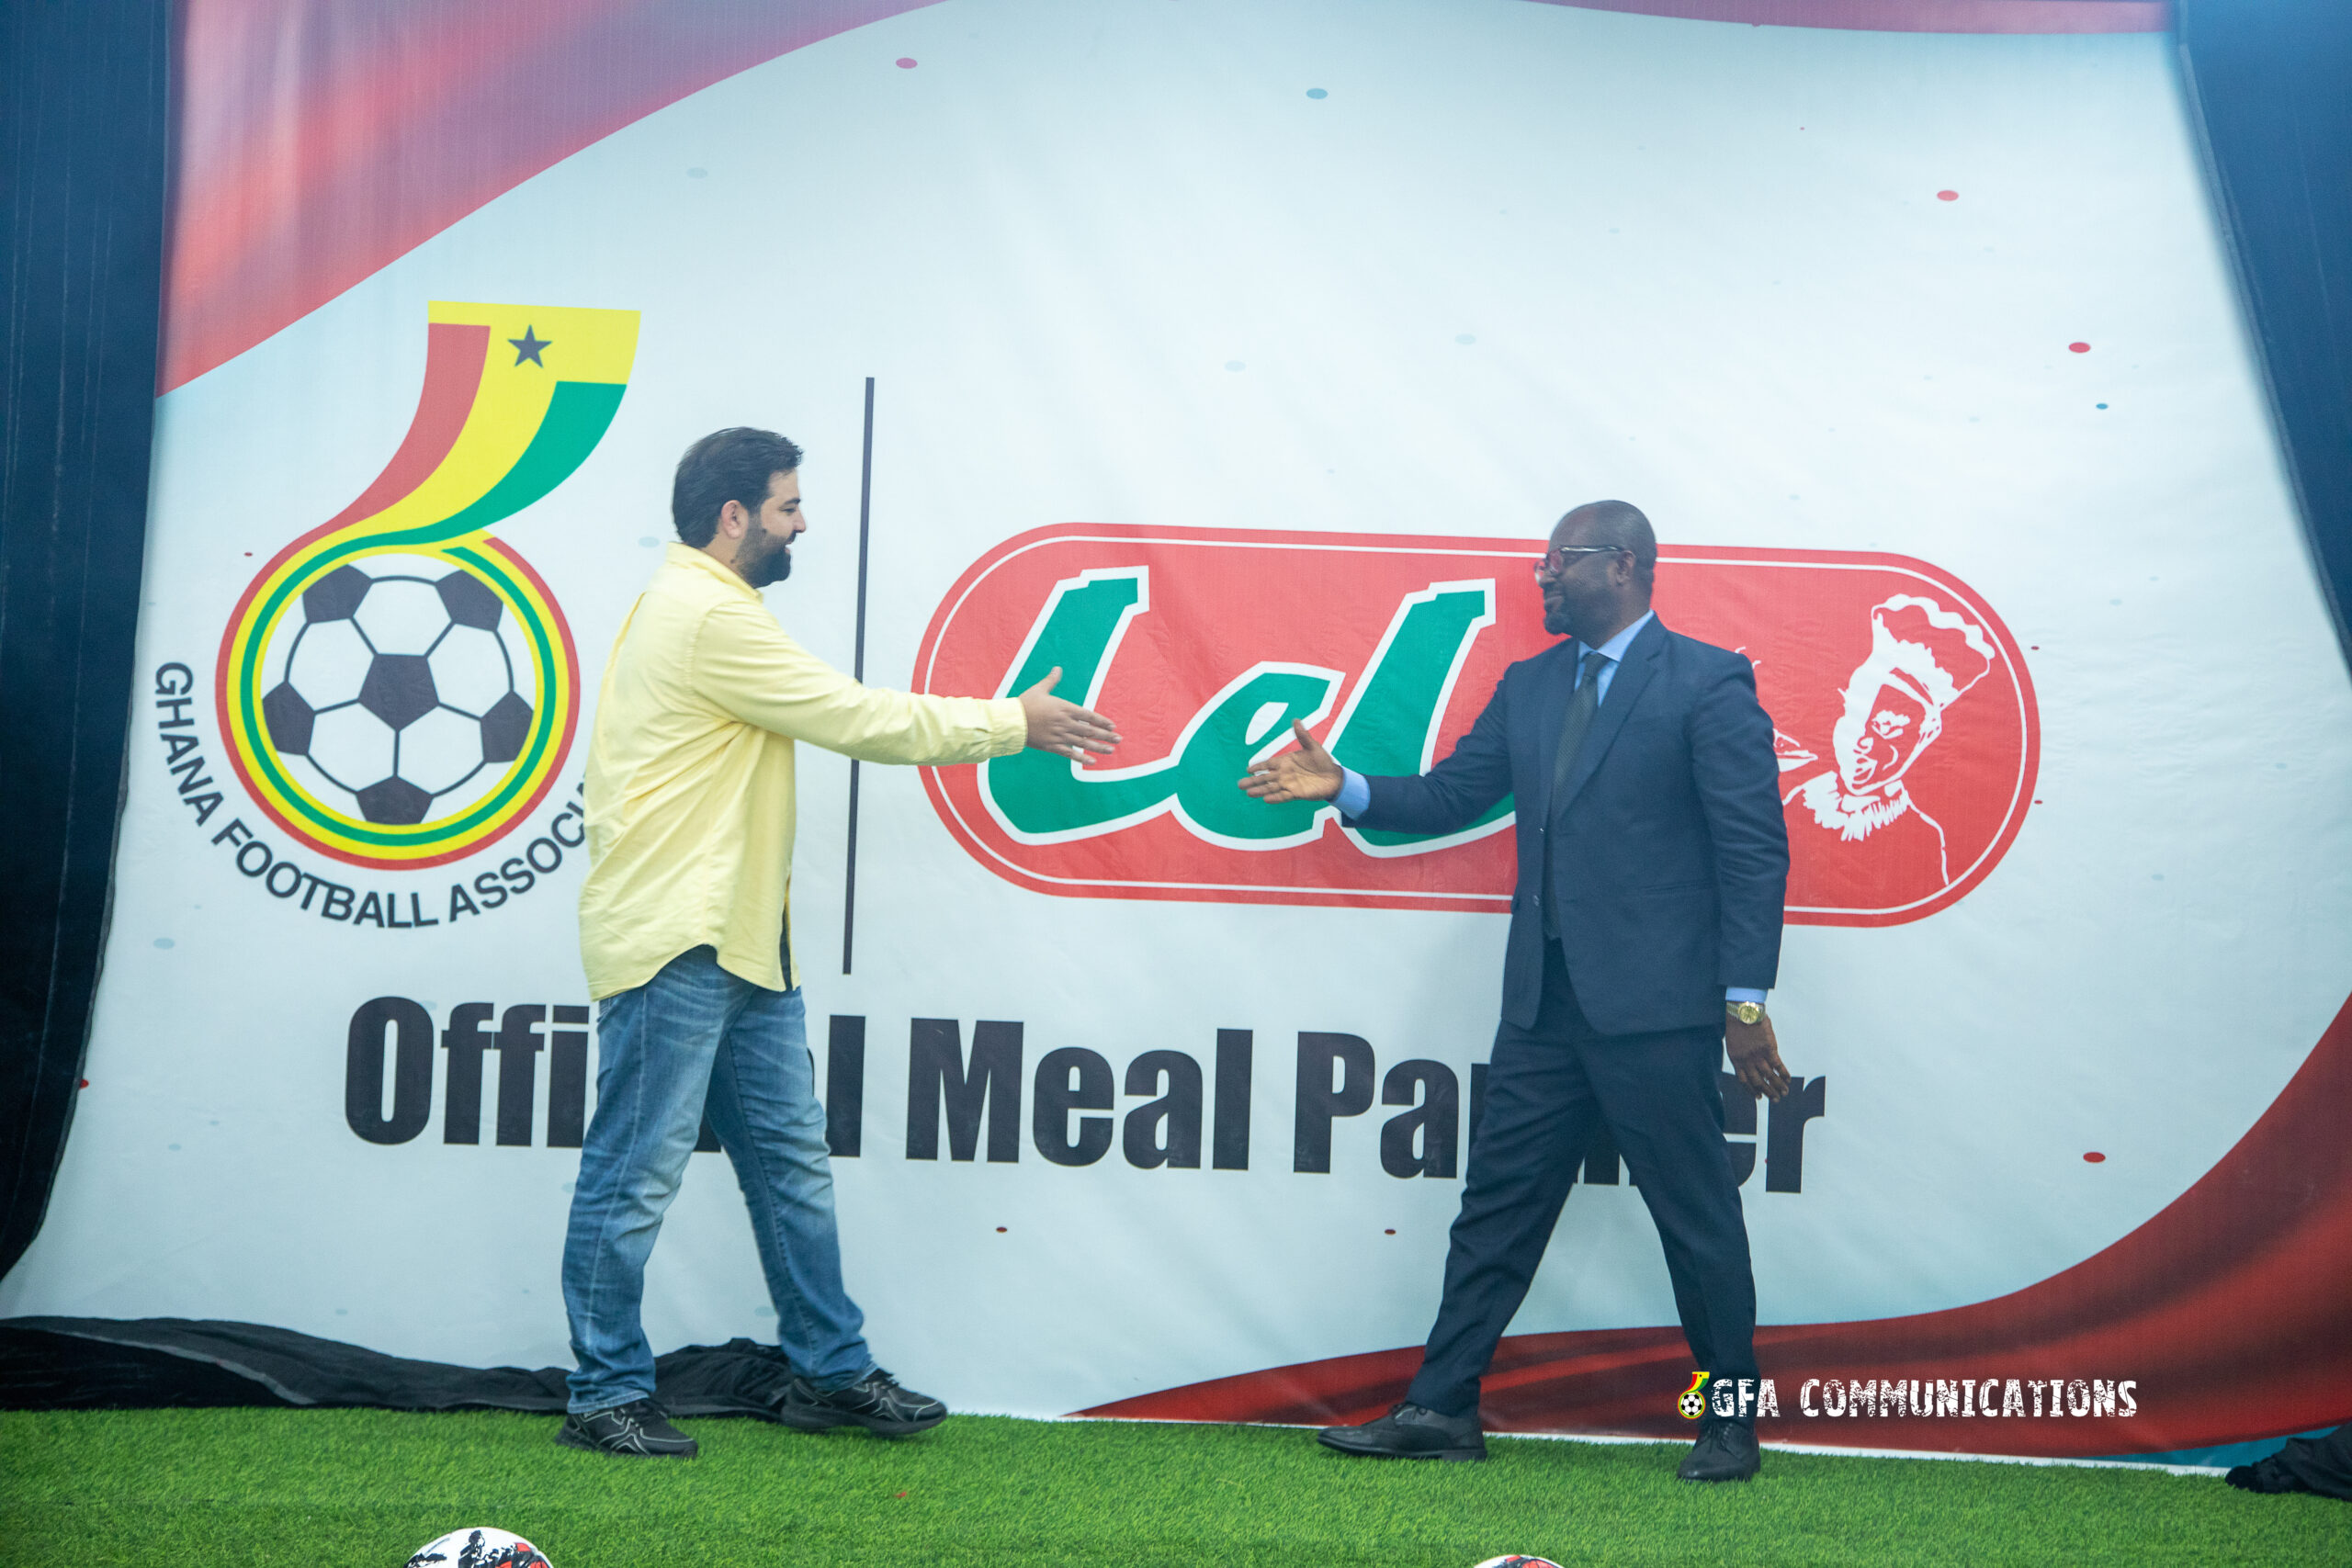 GFA signs partnership with Lele as official food partner